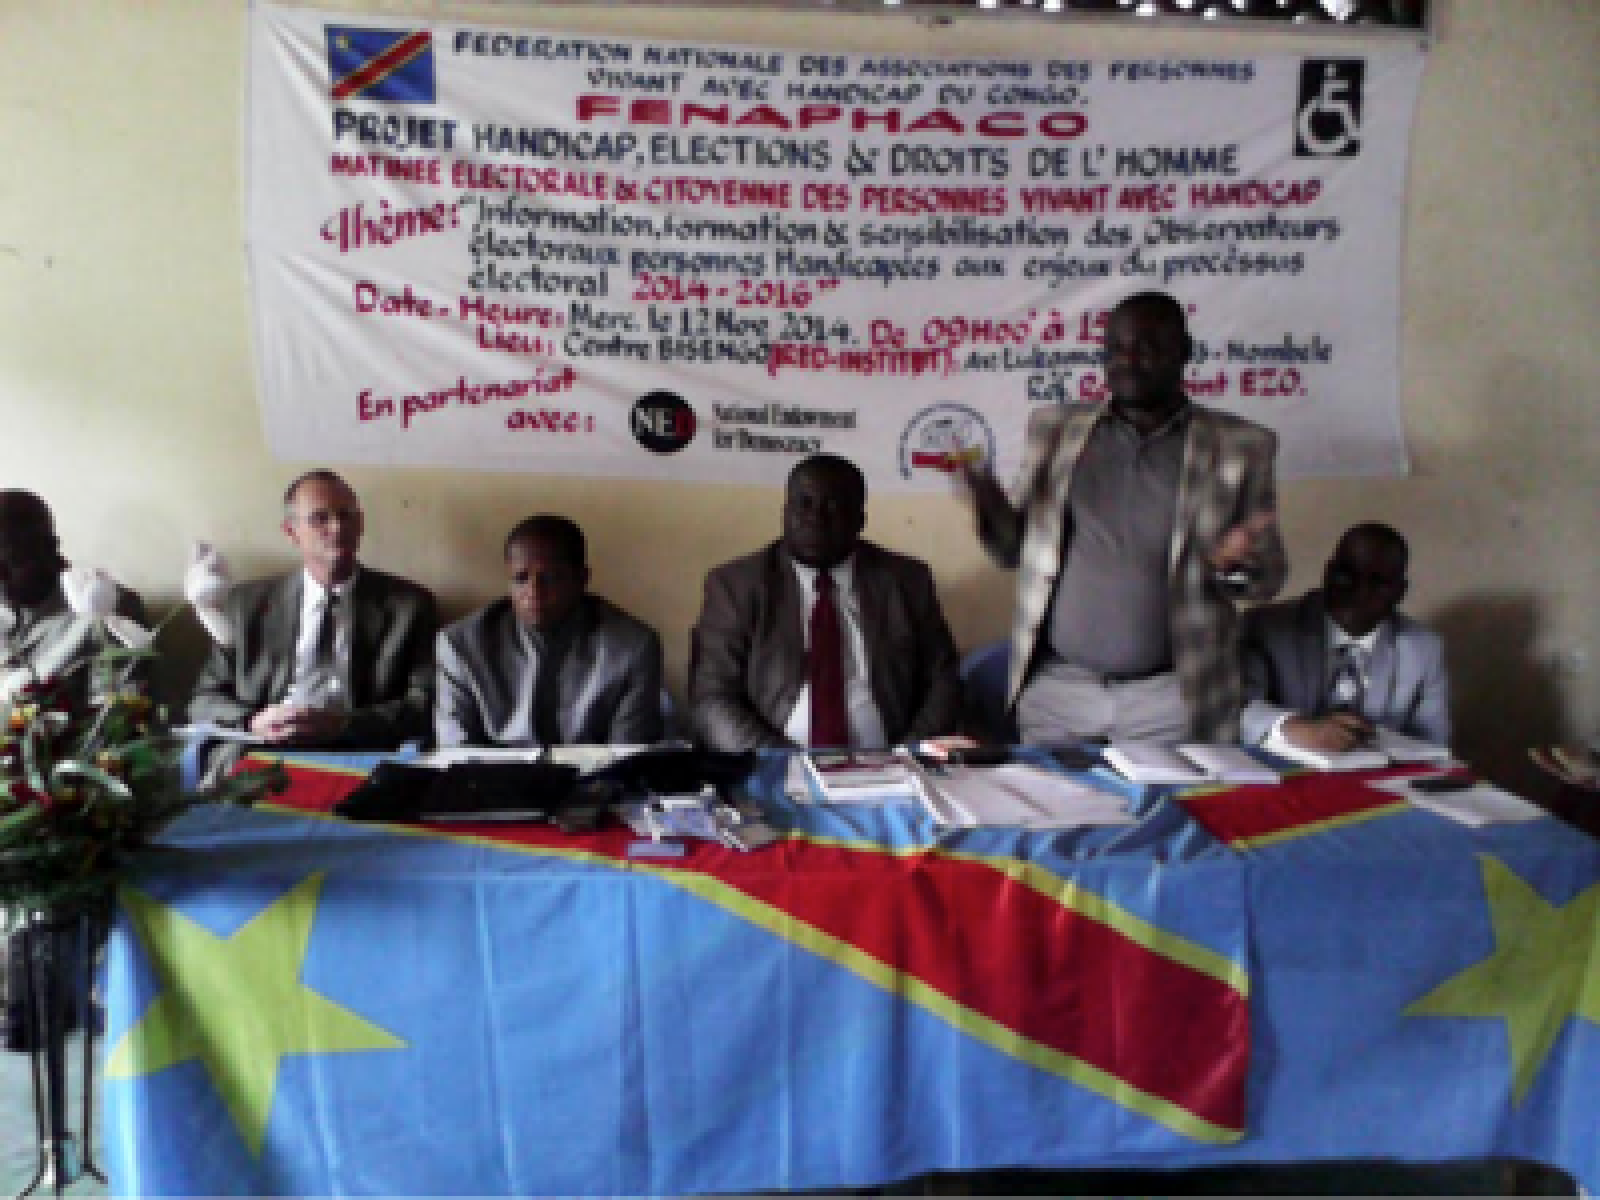 Disabled Persons' Organizations Move to Ensure Participation in Elections